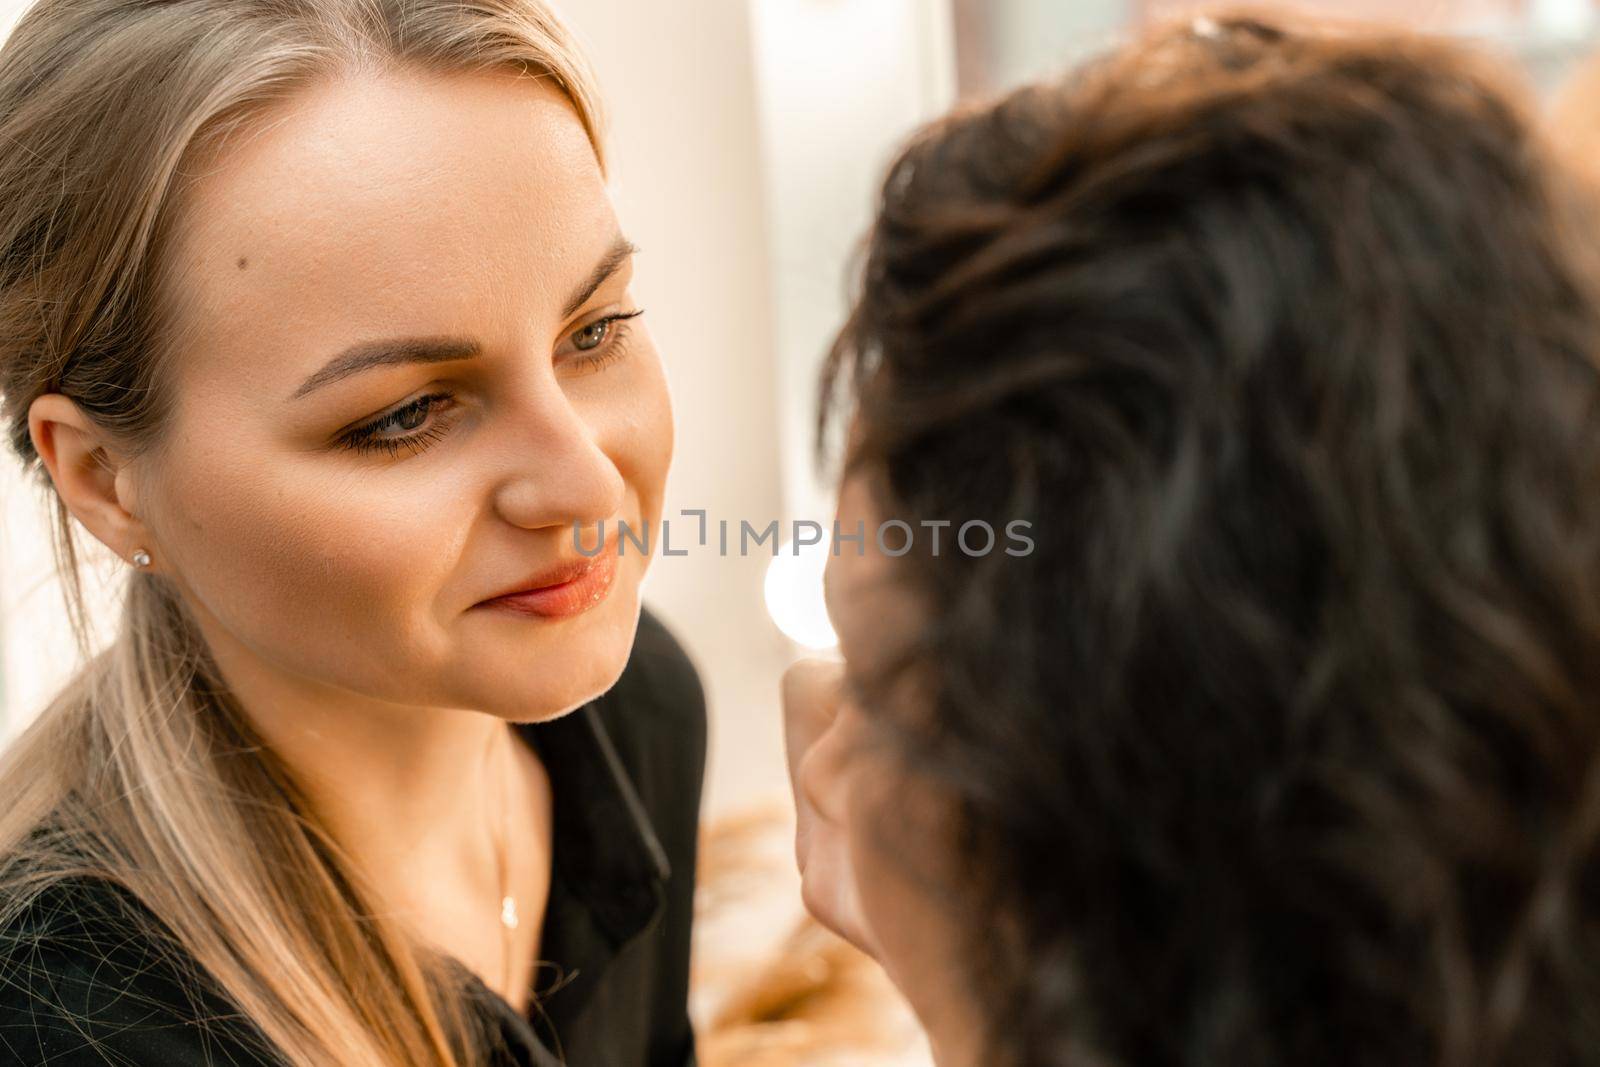 Make-up artist makes a professional make-up of a young woman in the studio